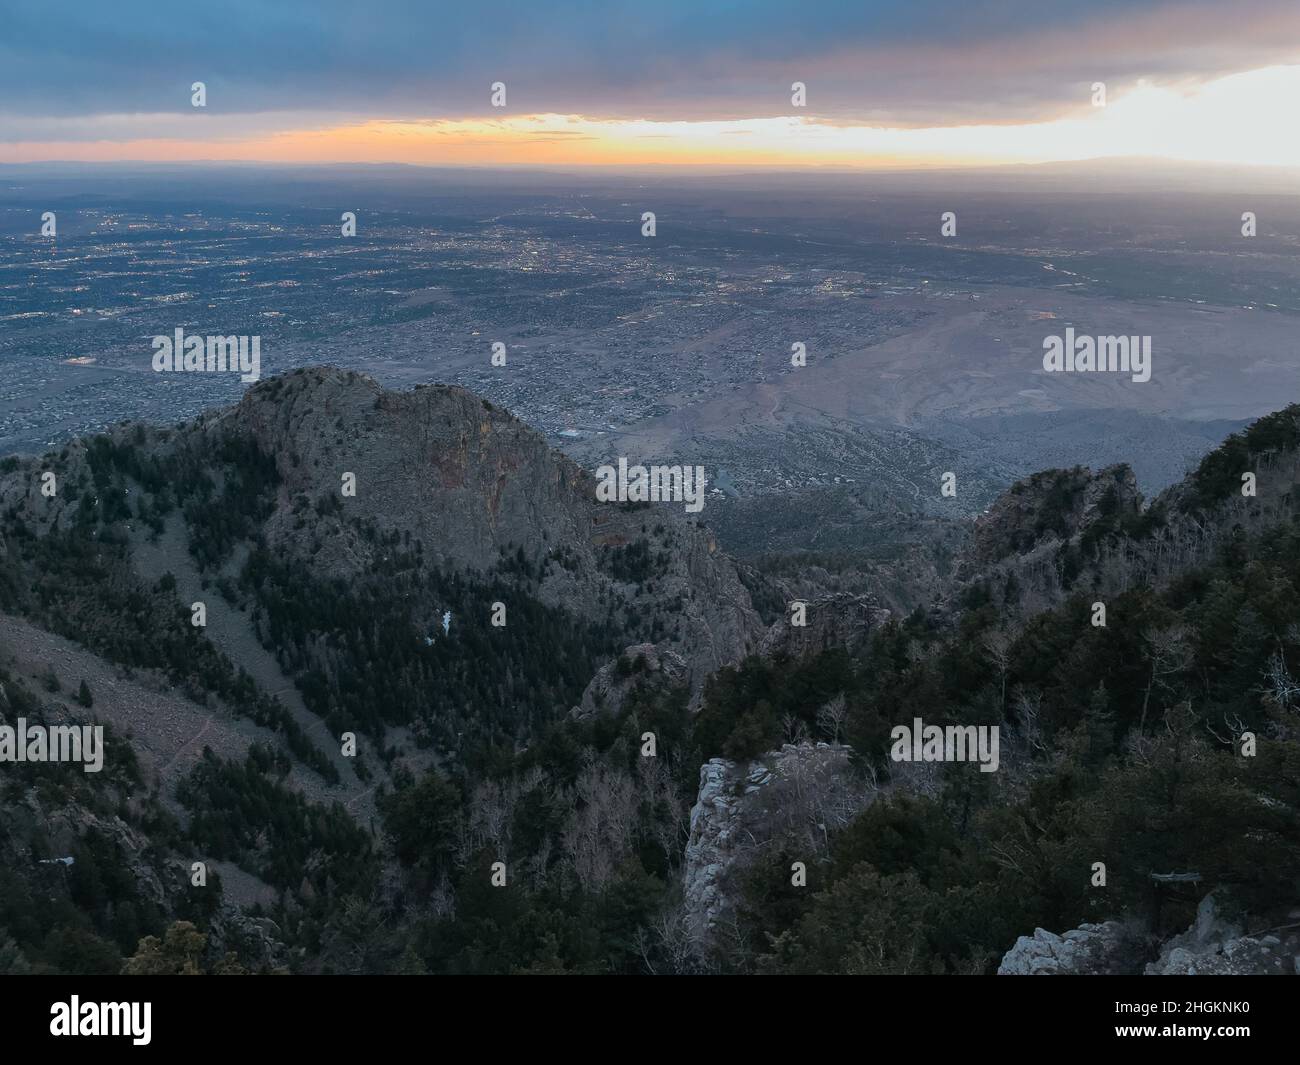 the city of Albuquerque as seen at sunset from the Sandia Mountains, New Mexico, USA Stock Photo